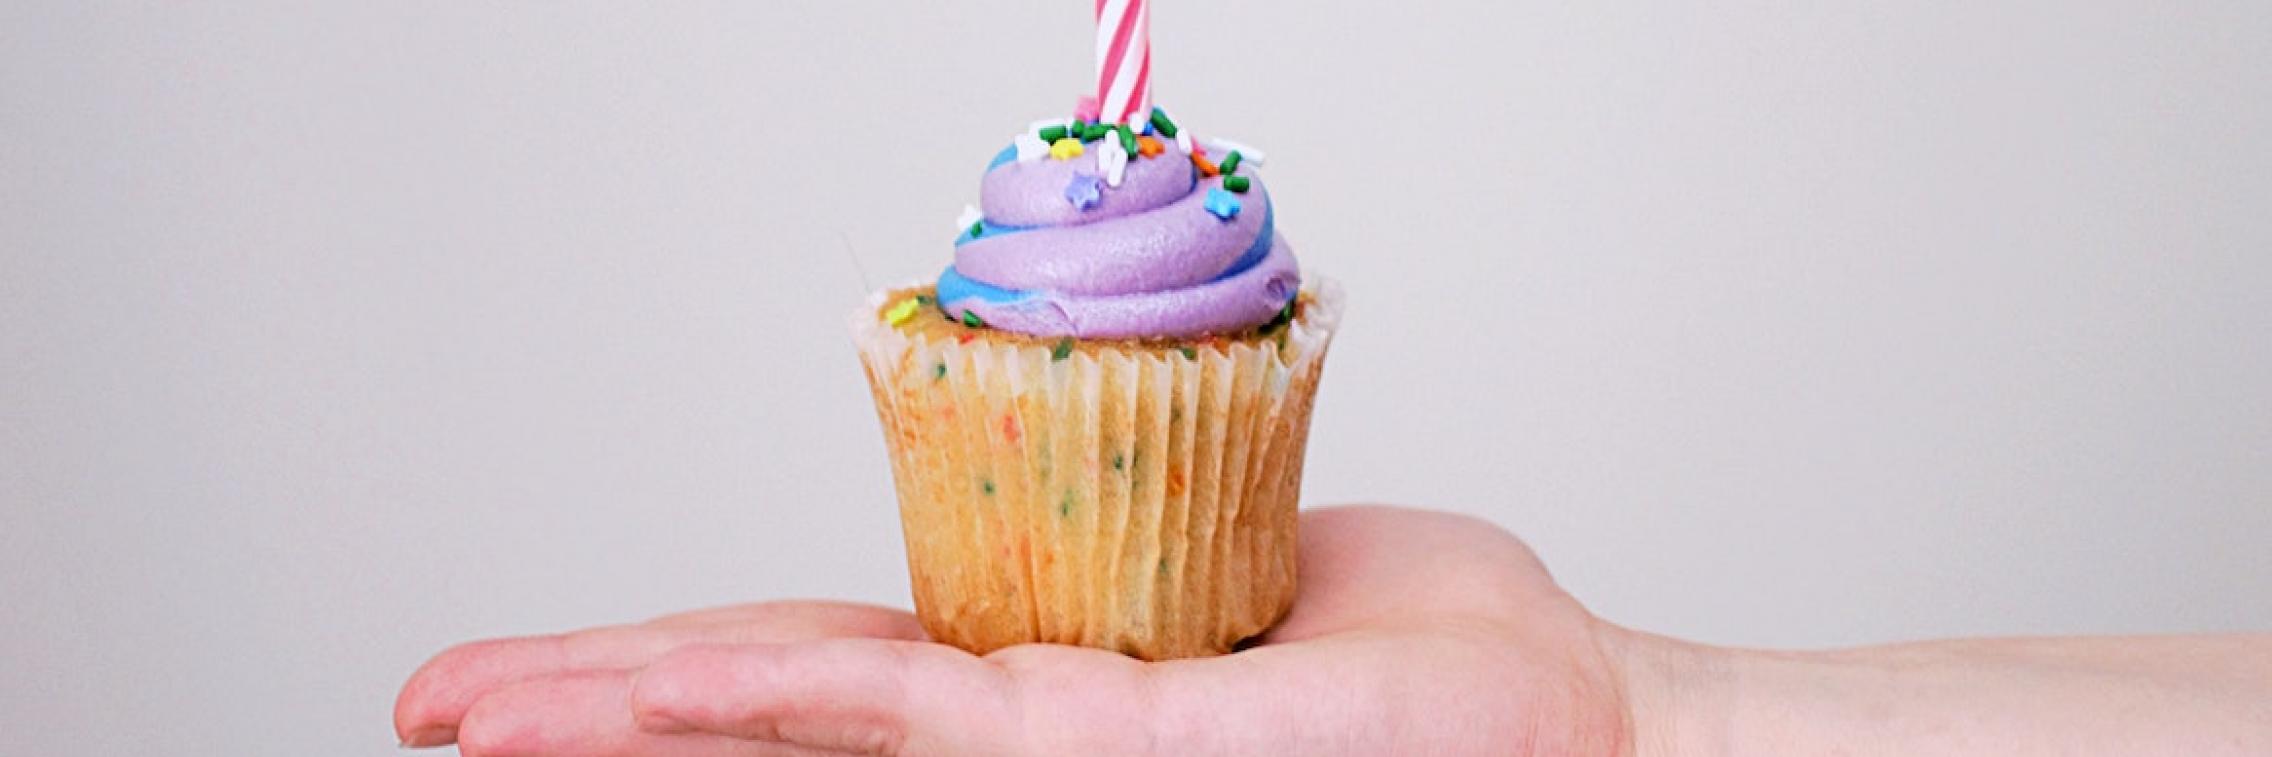 A person holding a birthday cupcake.